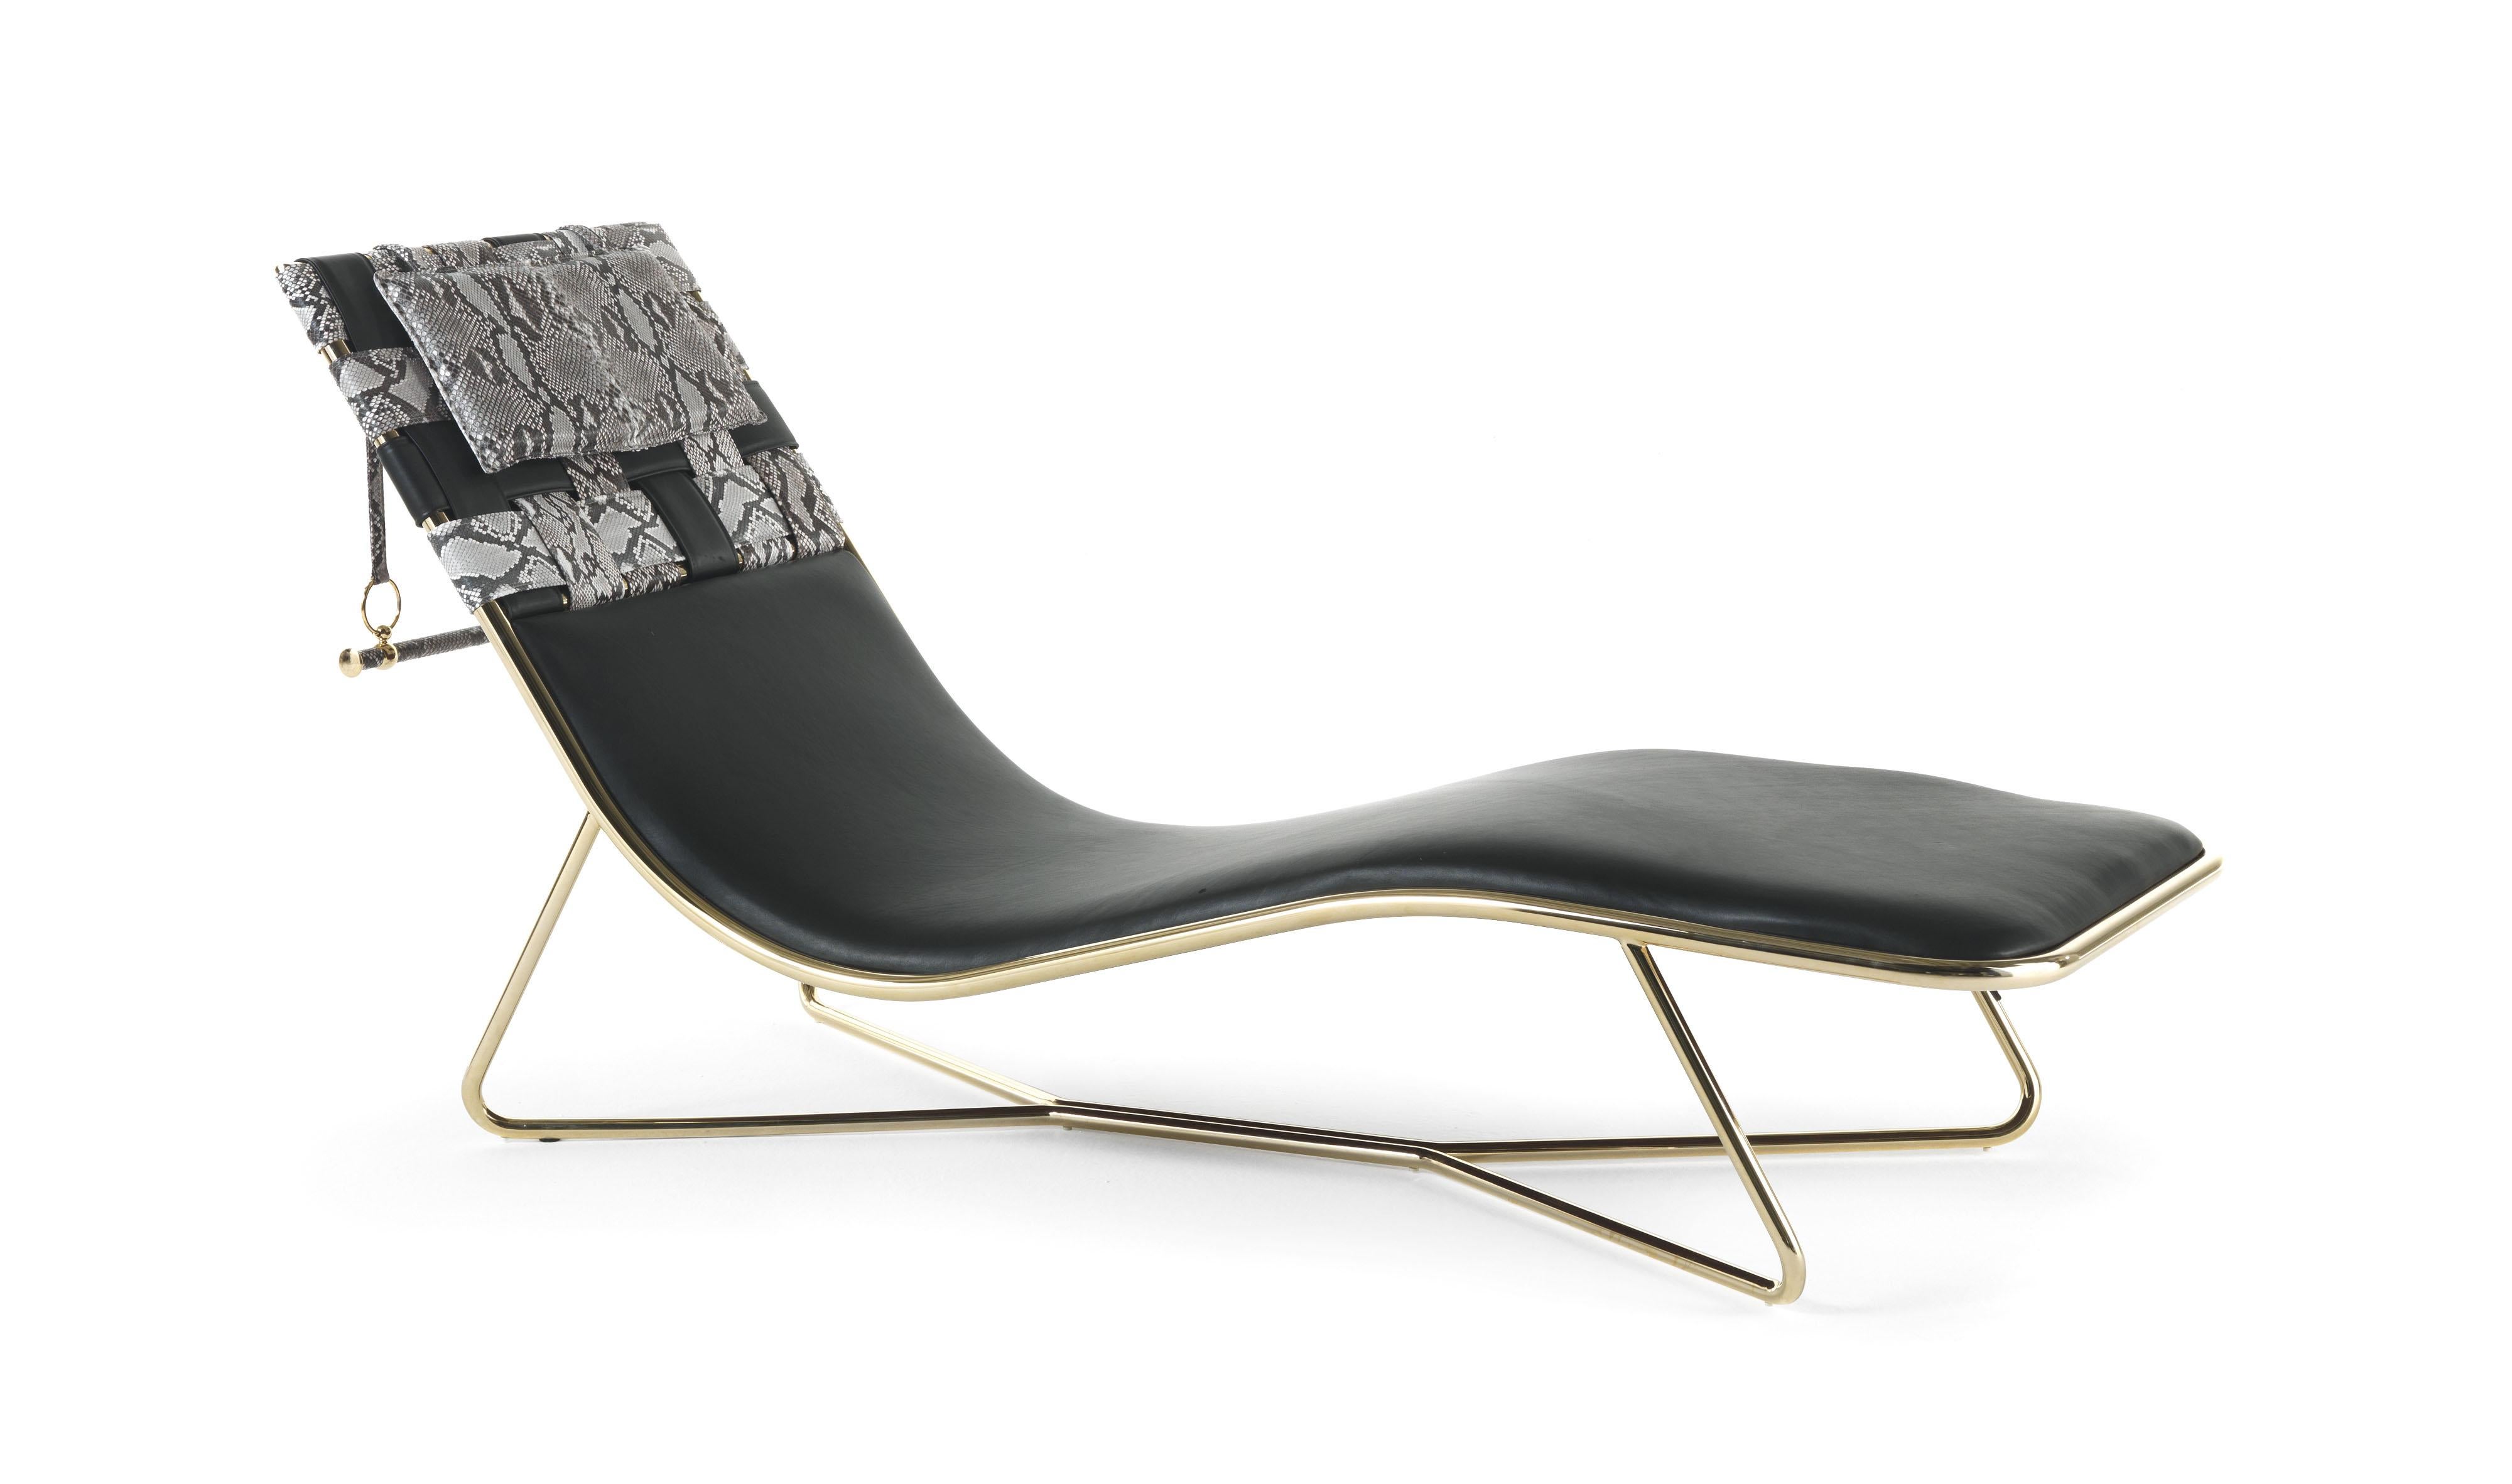 An irresistible invitation to chill out in pure Roberto Cavalli style, the Papeete chaise longue conquers with its essential lines and its sinuous and inviting shapes. In perfect balance between comfort, style and functionality, this piece of